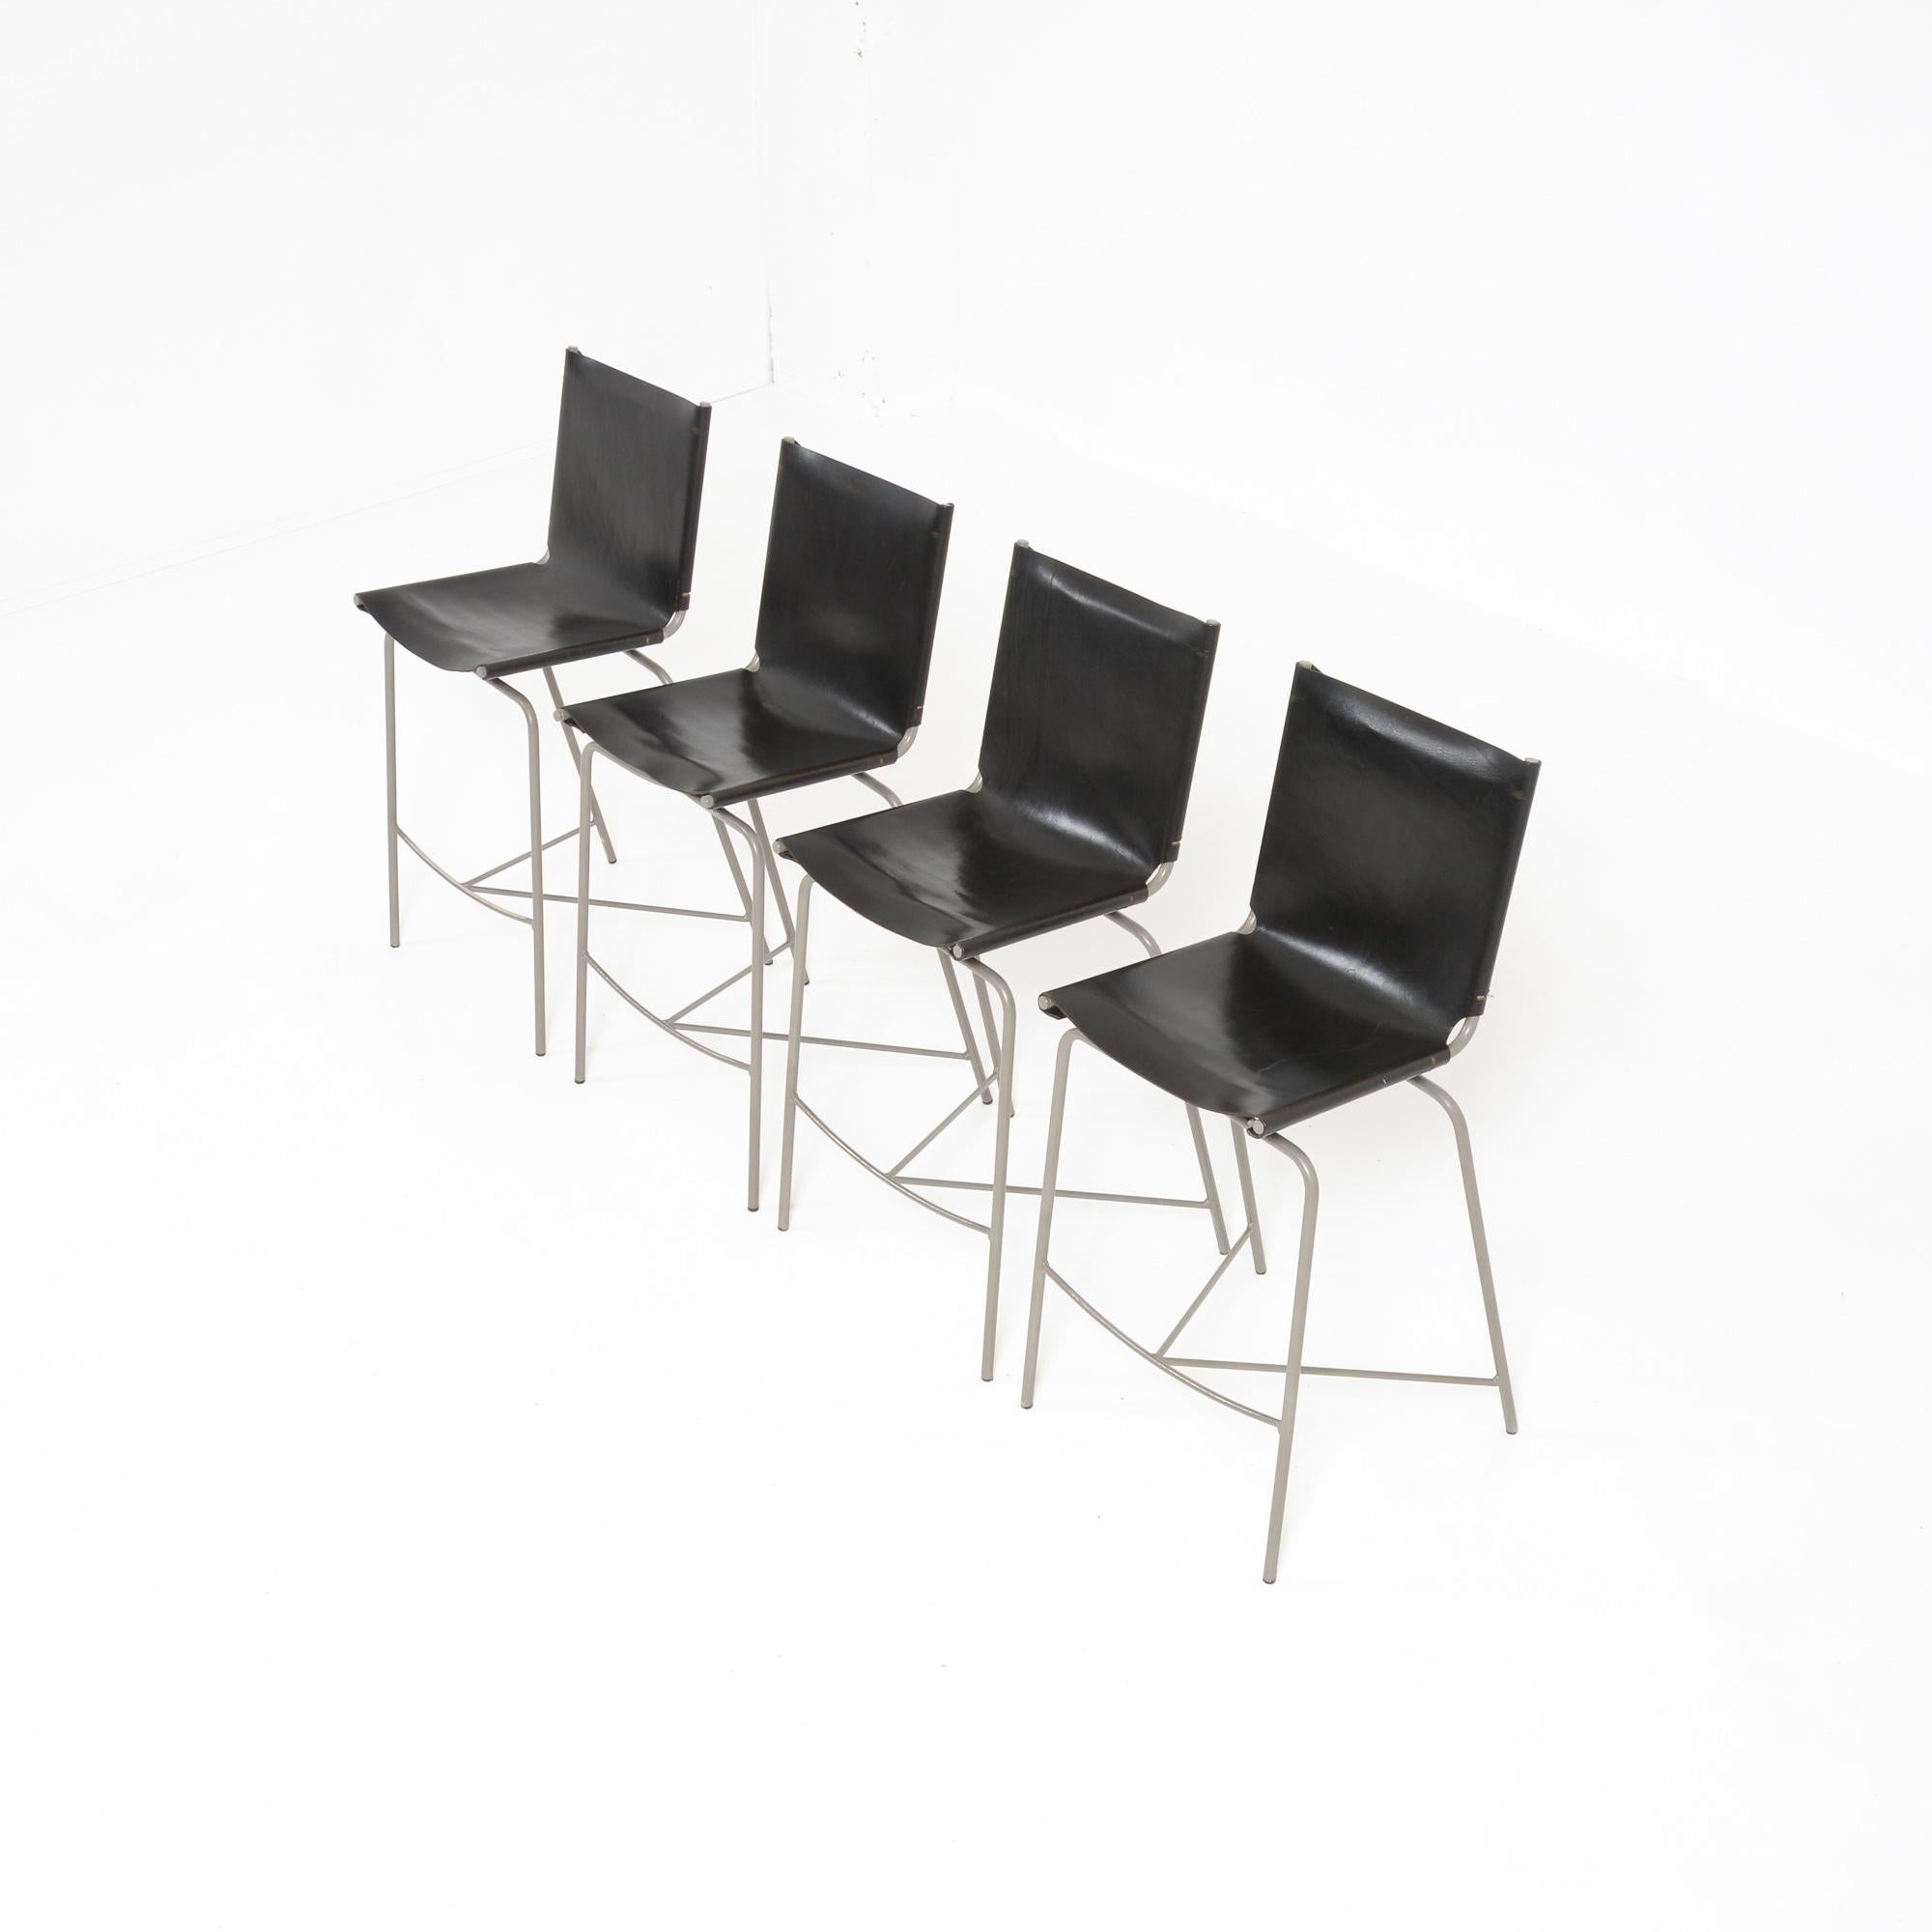 The crossed legs chair was designed by Fabian Van Severen in 1998.
These bar stools were manufactured in the designer’s atelier.
The thick leather seats are attached with laces to the grey coated tubular metal crossed legs base.
The stools are in